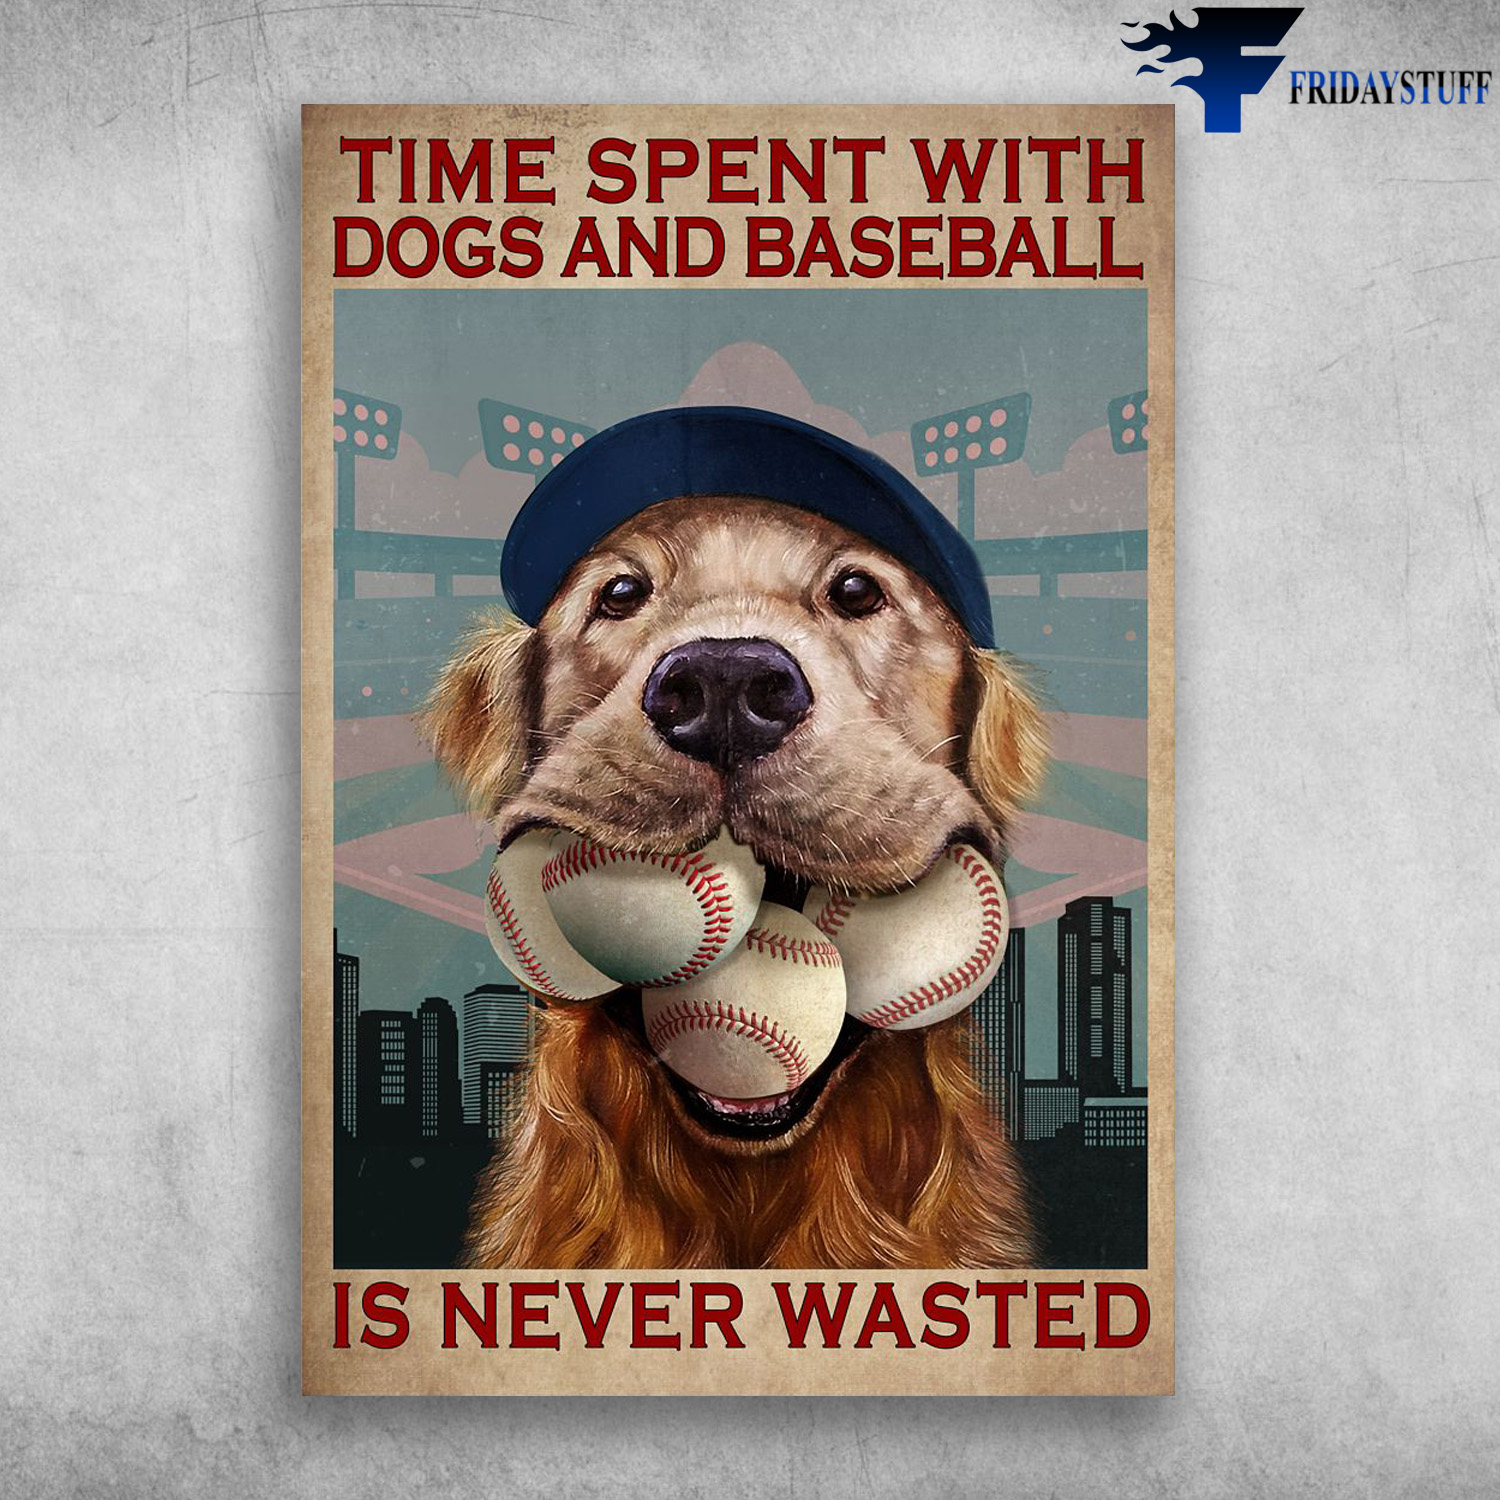 Baseball Golden Retriever - Time Spent With Dogs And Baseball, Is Never Wasted